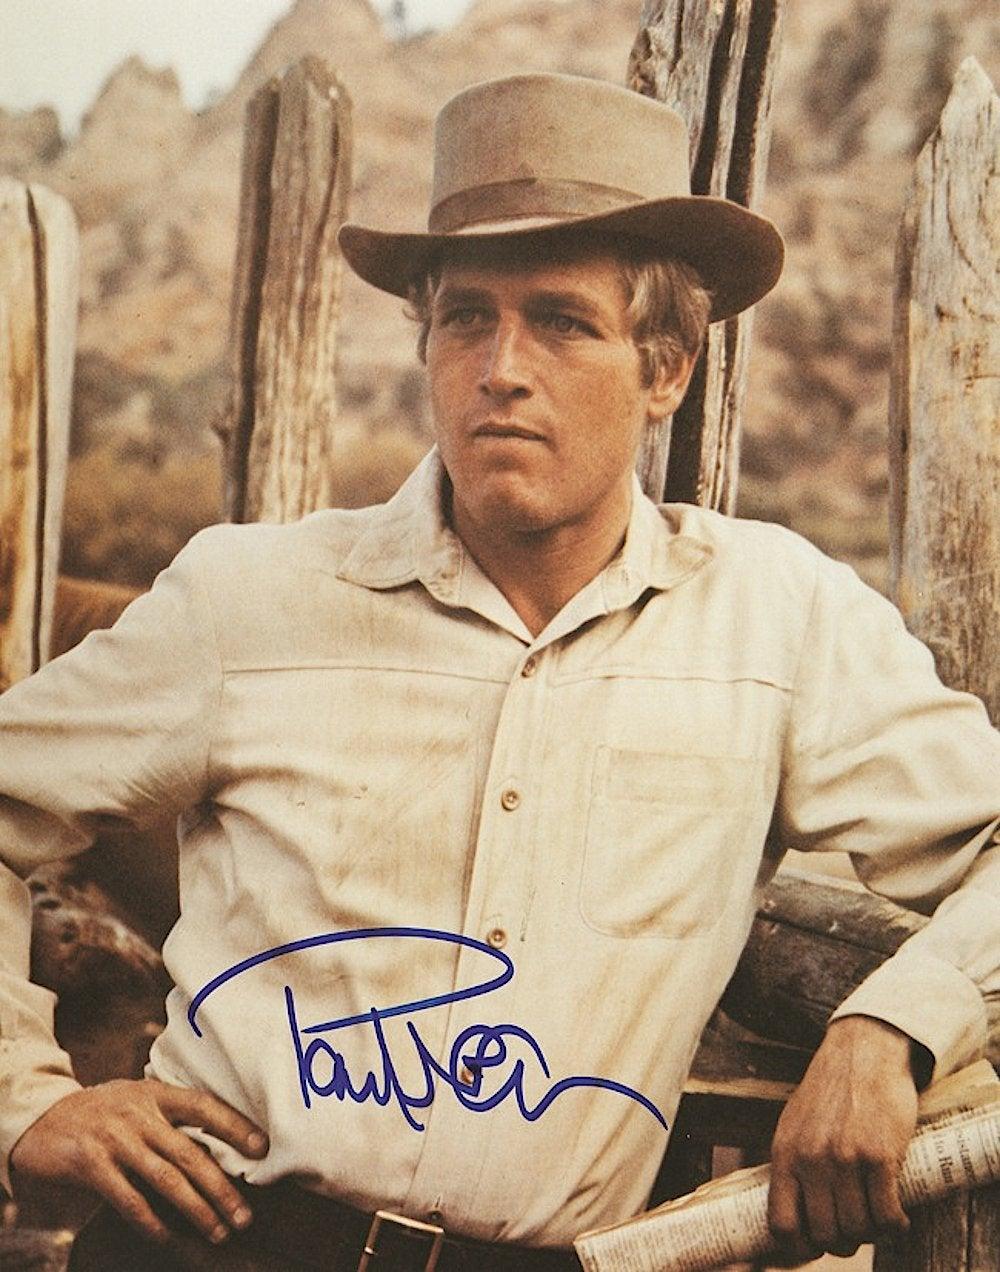 A signed photograph of Paul Newman in his famous role as Butch Cassidy

Paul Newman (1925 – 2008) was an American actor, film director, and racing driver. 

Newman was one of Hollywood's most celebrated actors, whose famous films included The